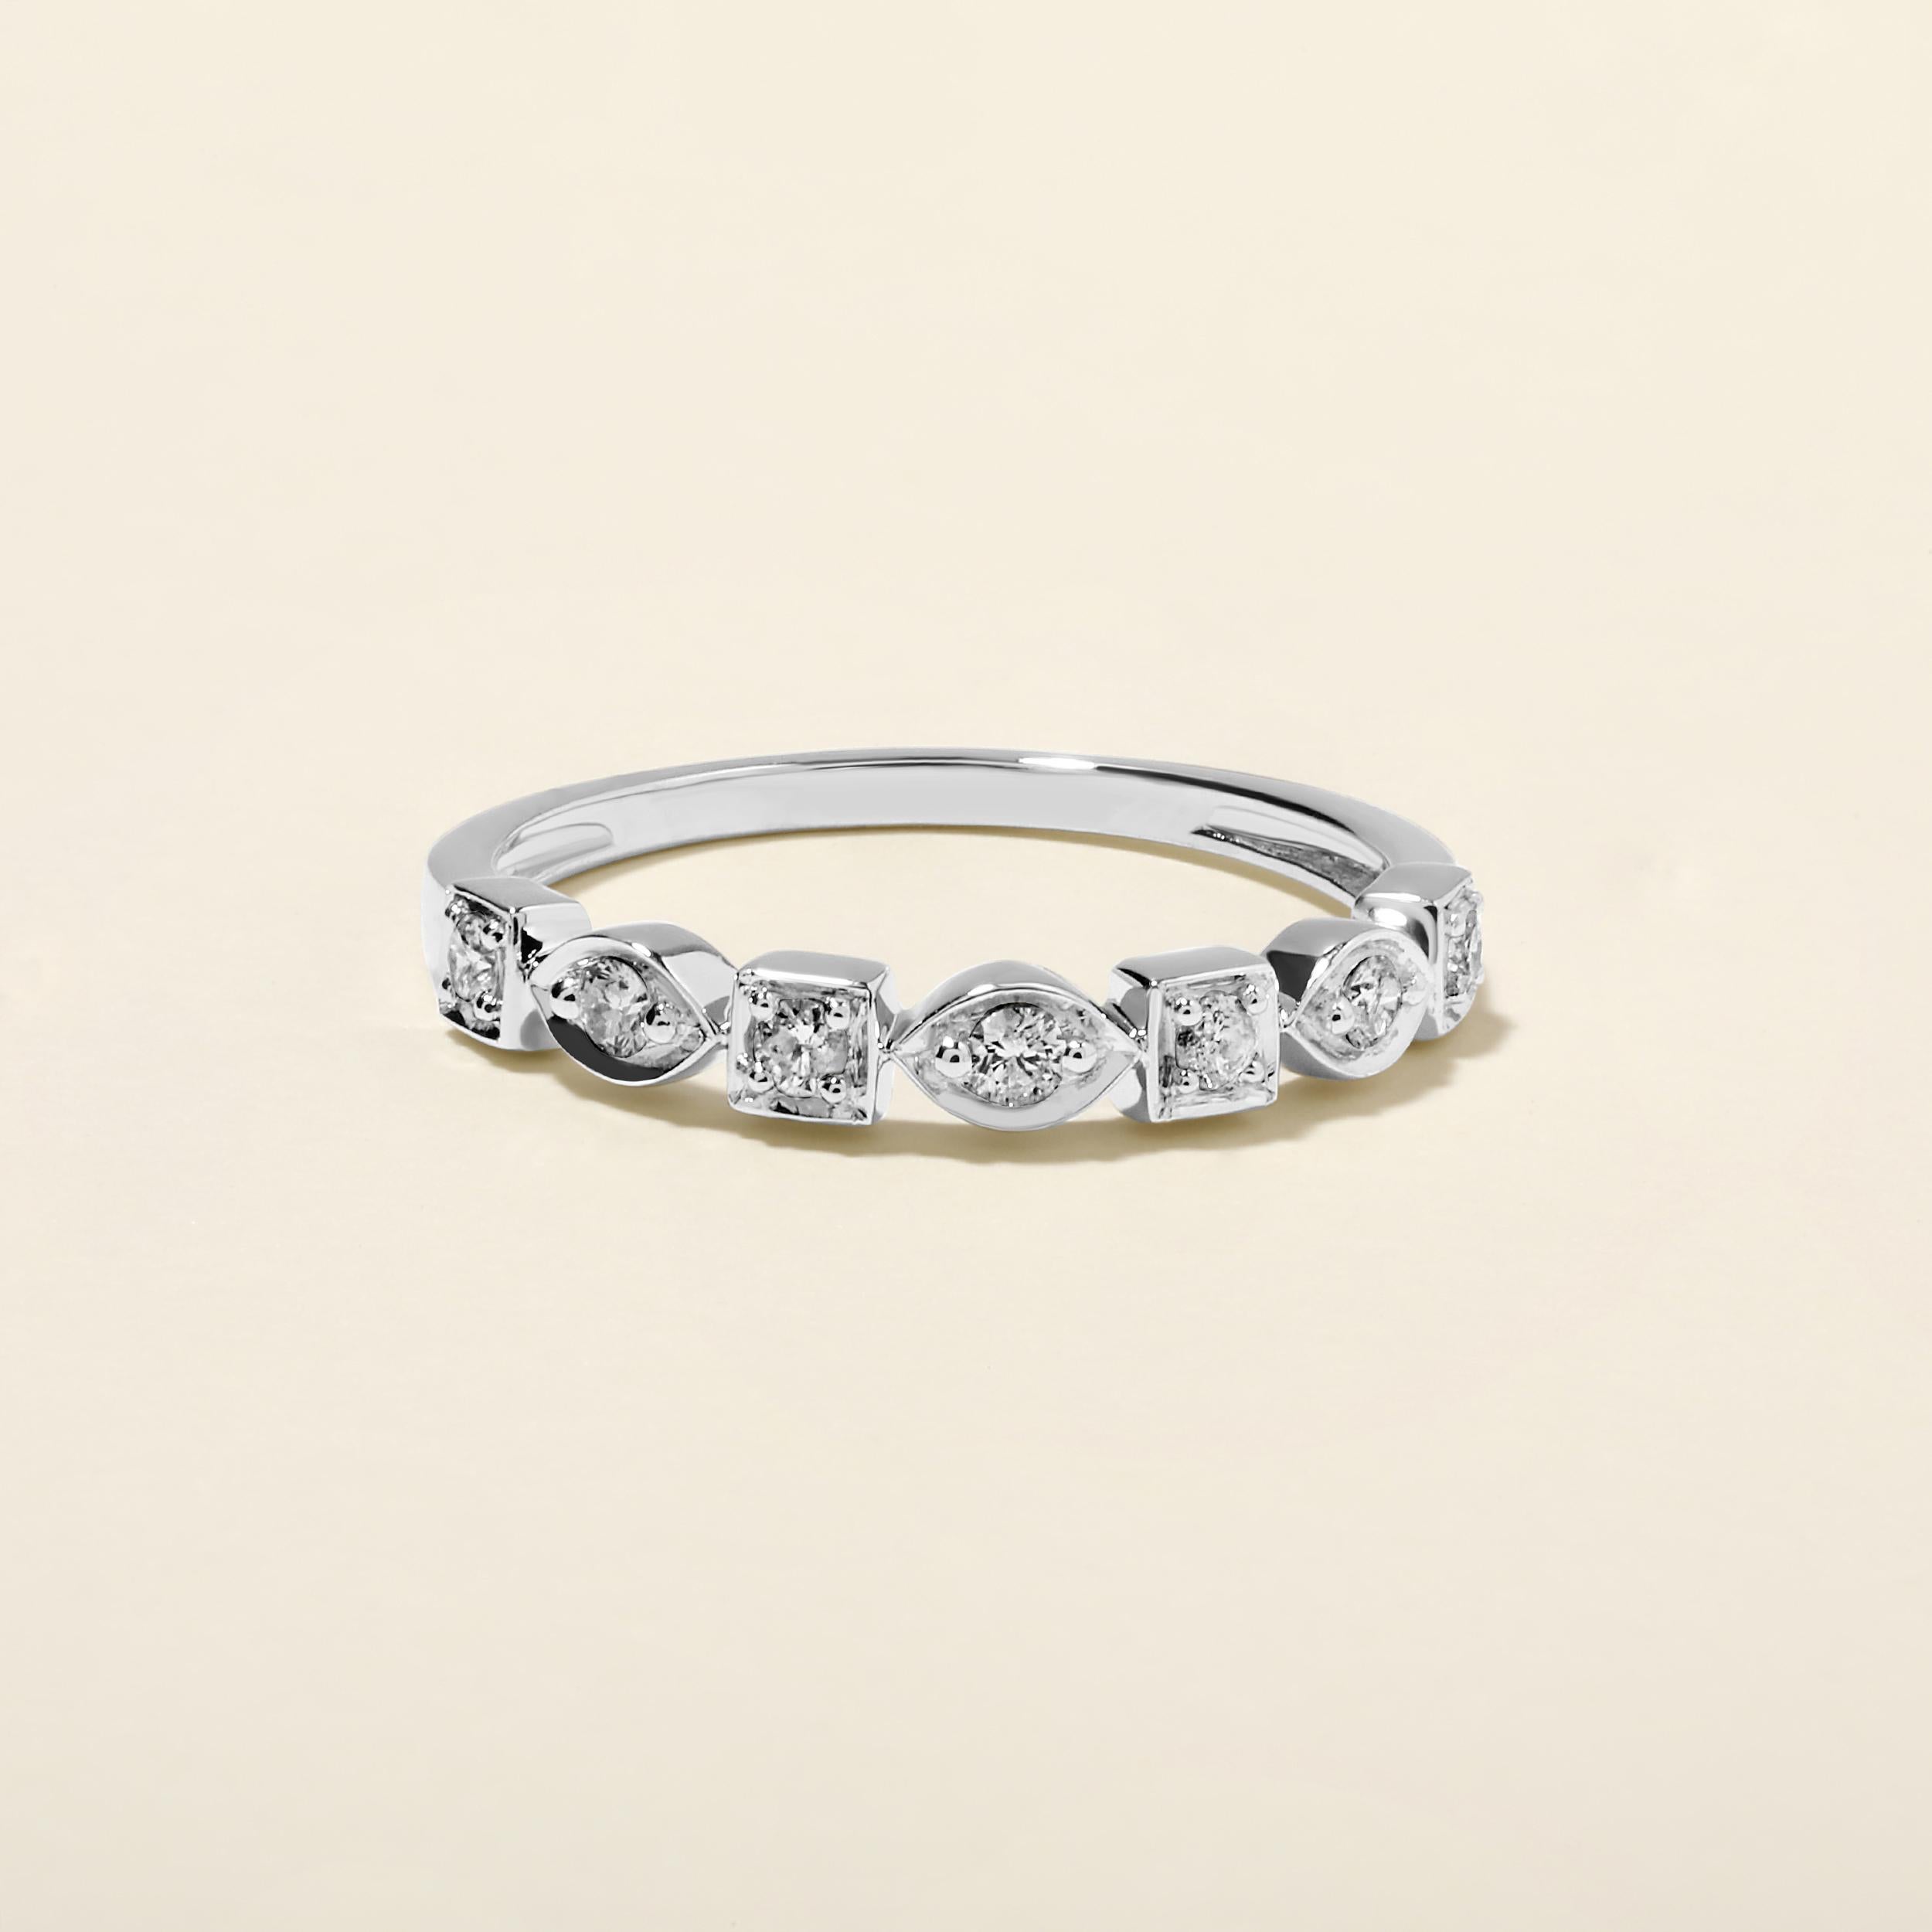 Ring Size: US 7

Crafted in 1.85 grams of 14K White Gold, the ring contains 7 stones of Round Natural Diamonds with a total of 0.18 carat in G-H color and I1-I2 clarity.

CONTEMPORARY AND TIMELESS ESSENCE: Crafted in 14-karat/18-karat with 100%